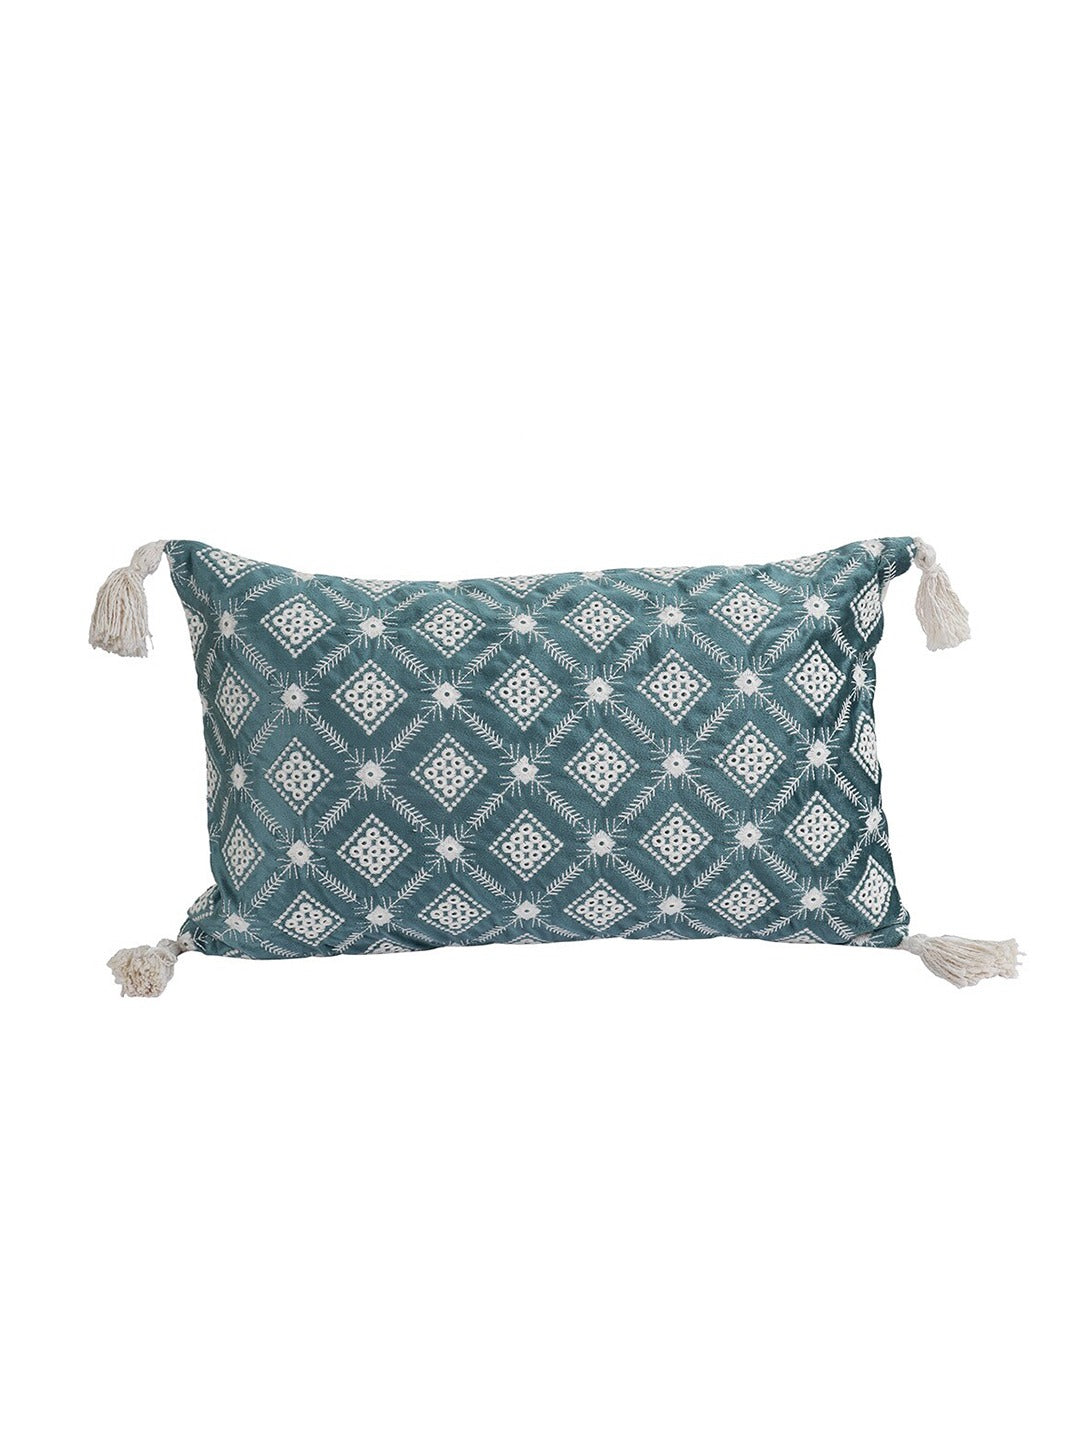 Set of 2 Teal & White Embroidered Velvet Rectangle Cushion Covers